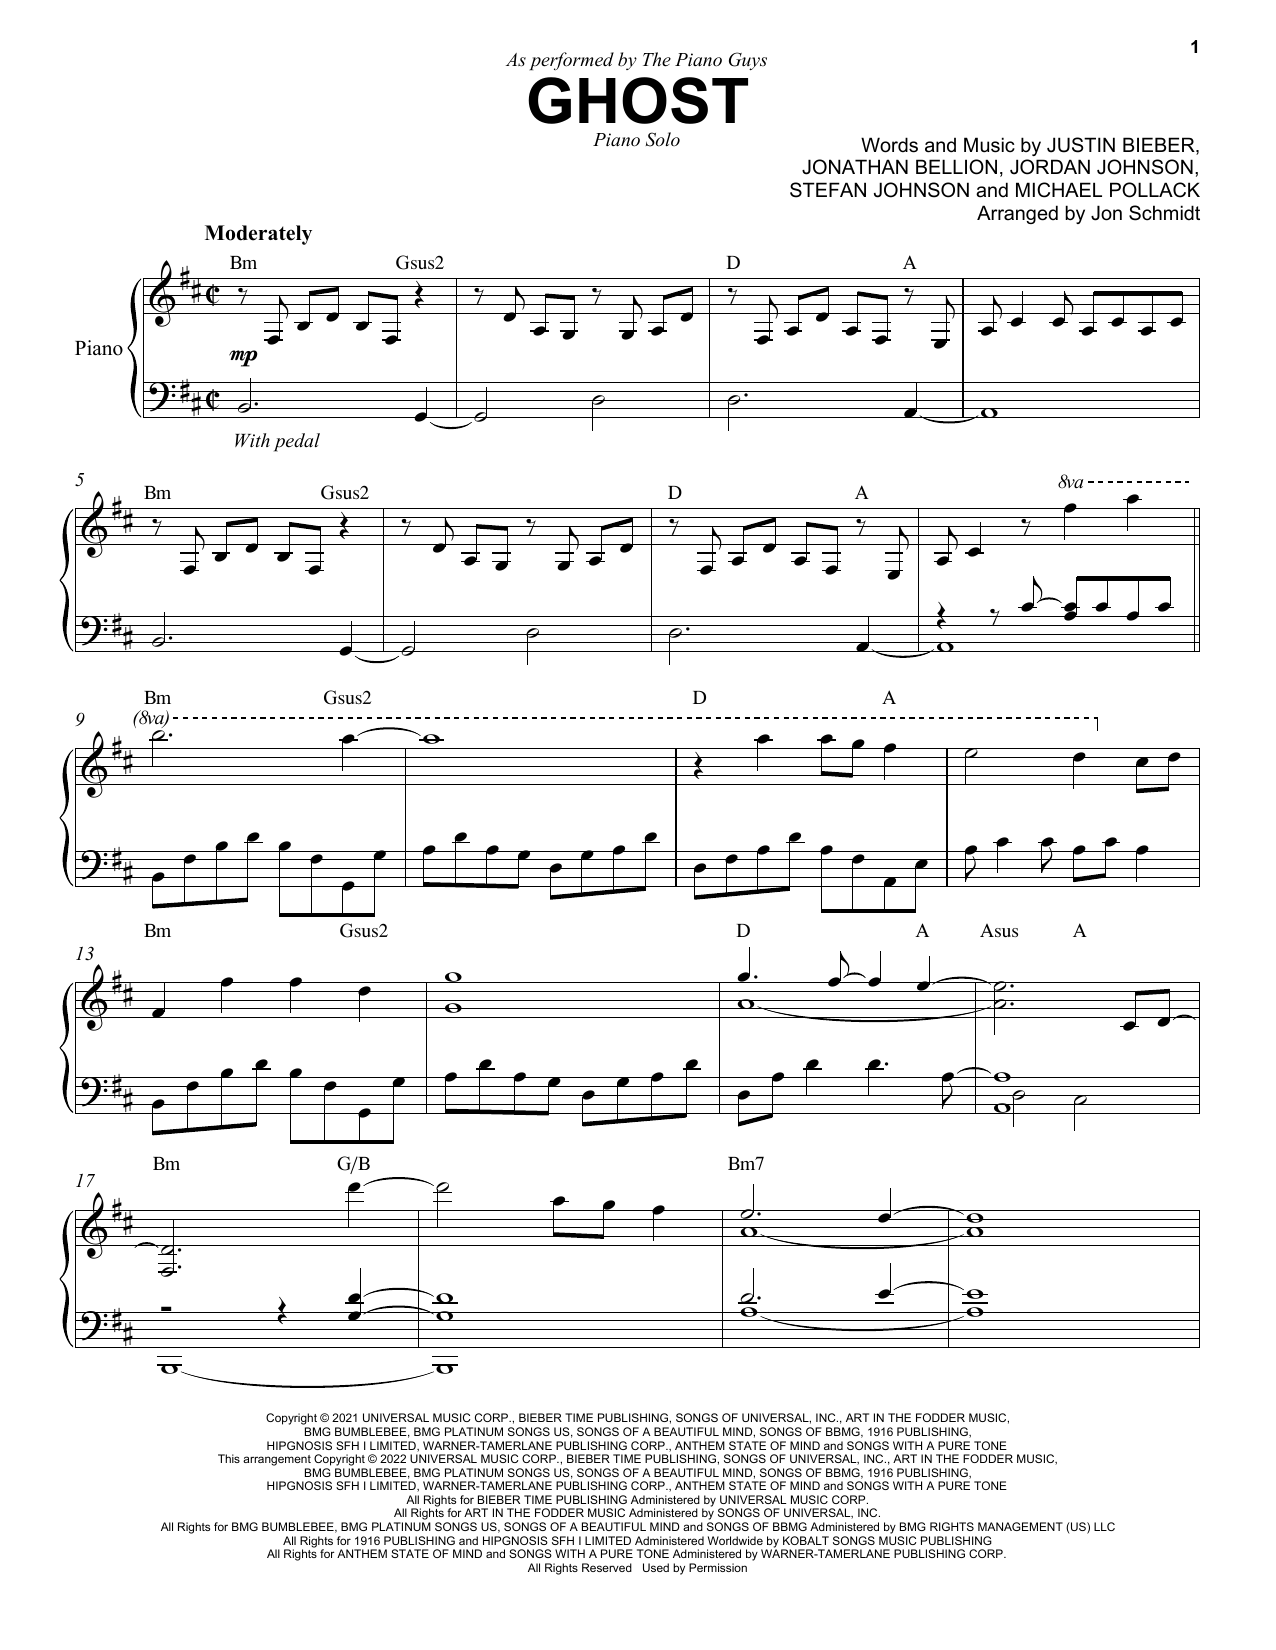 Download The Piano Guys Ghost Sheet Music